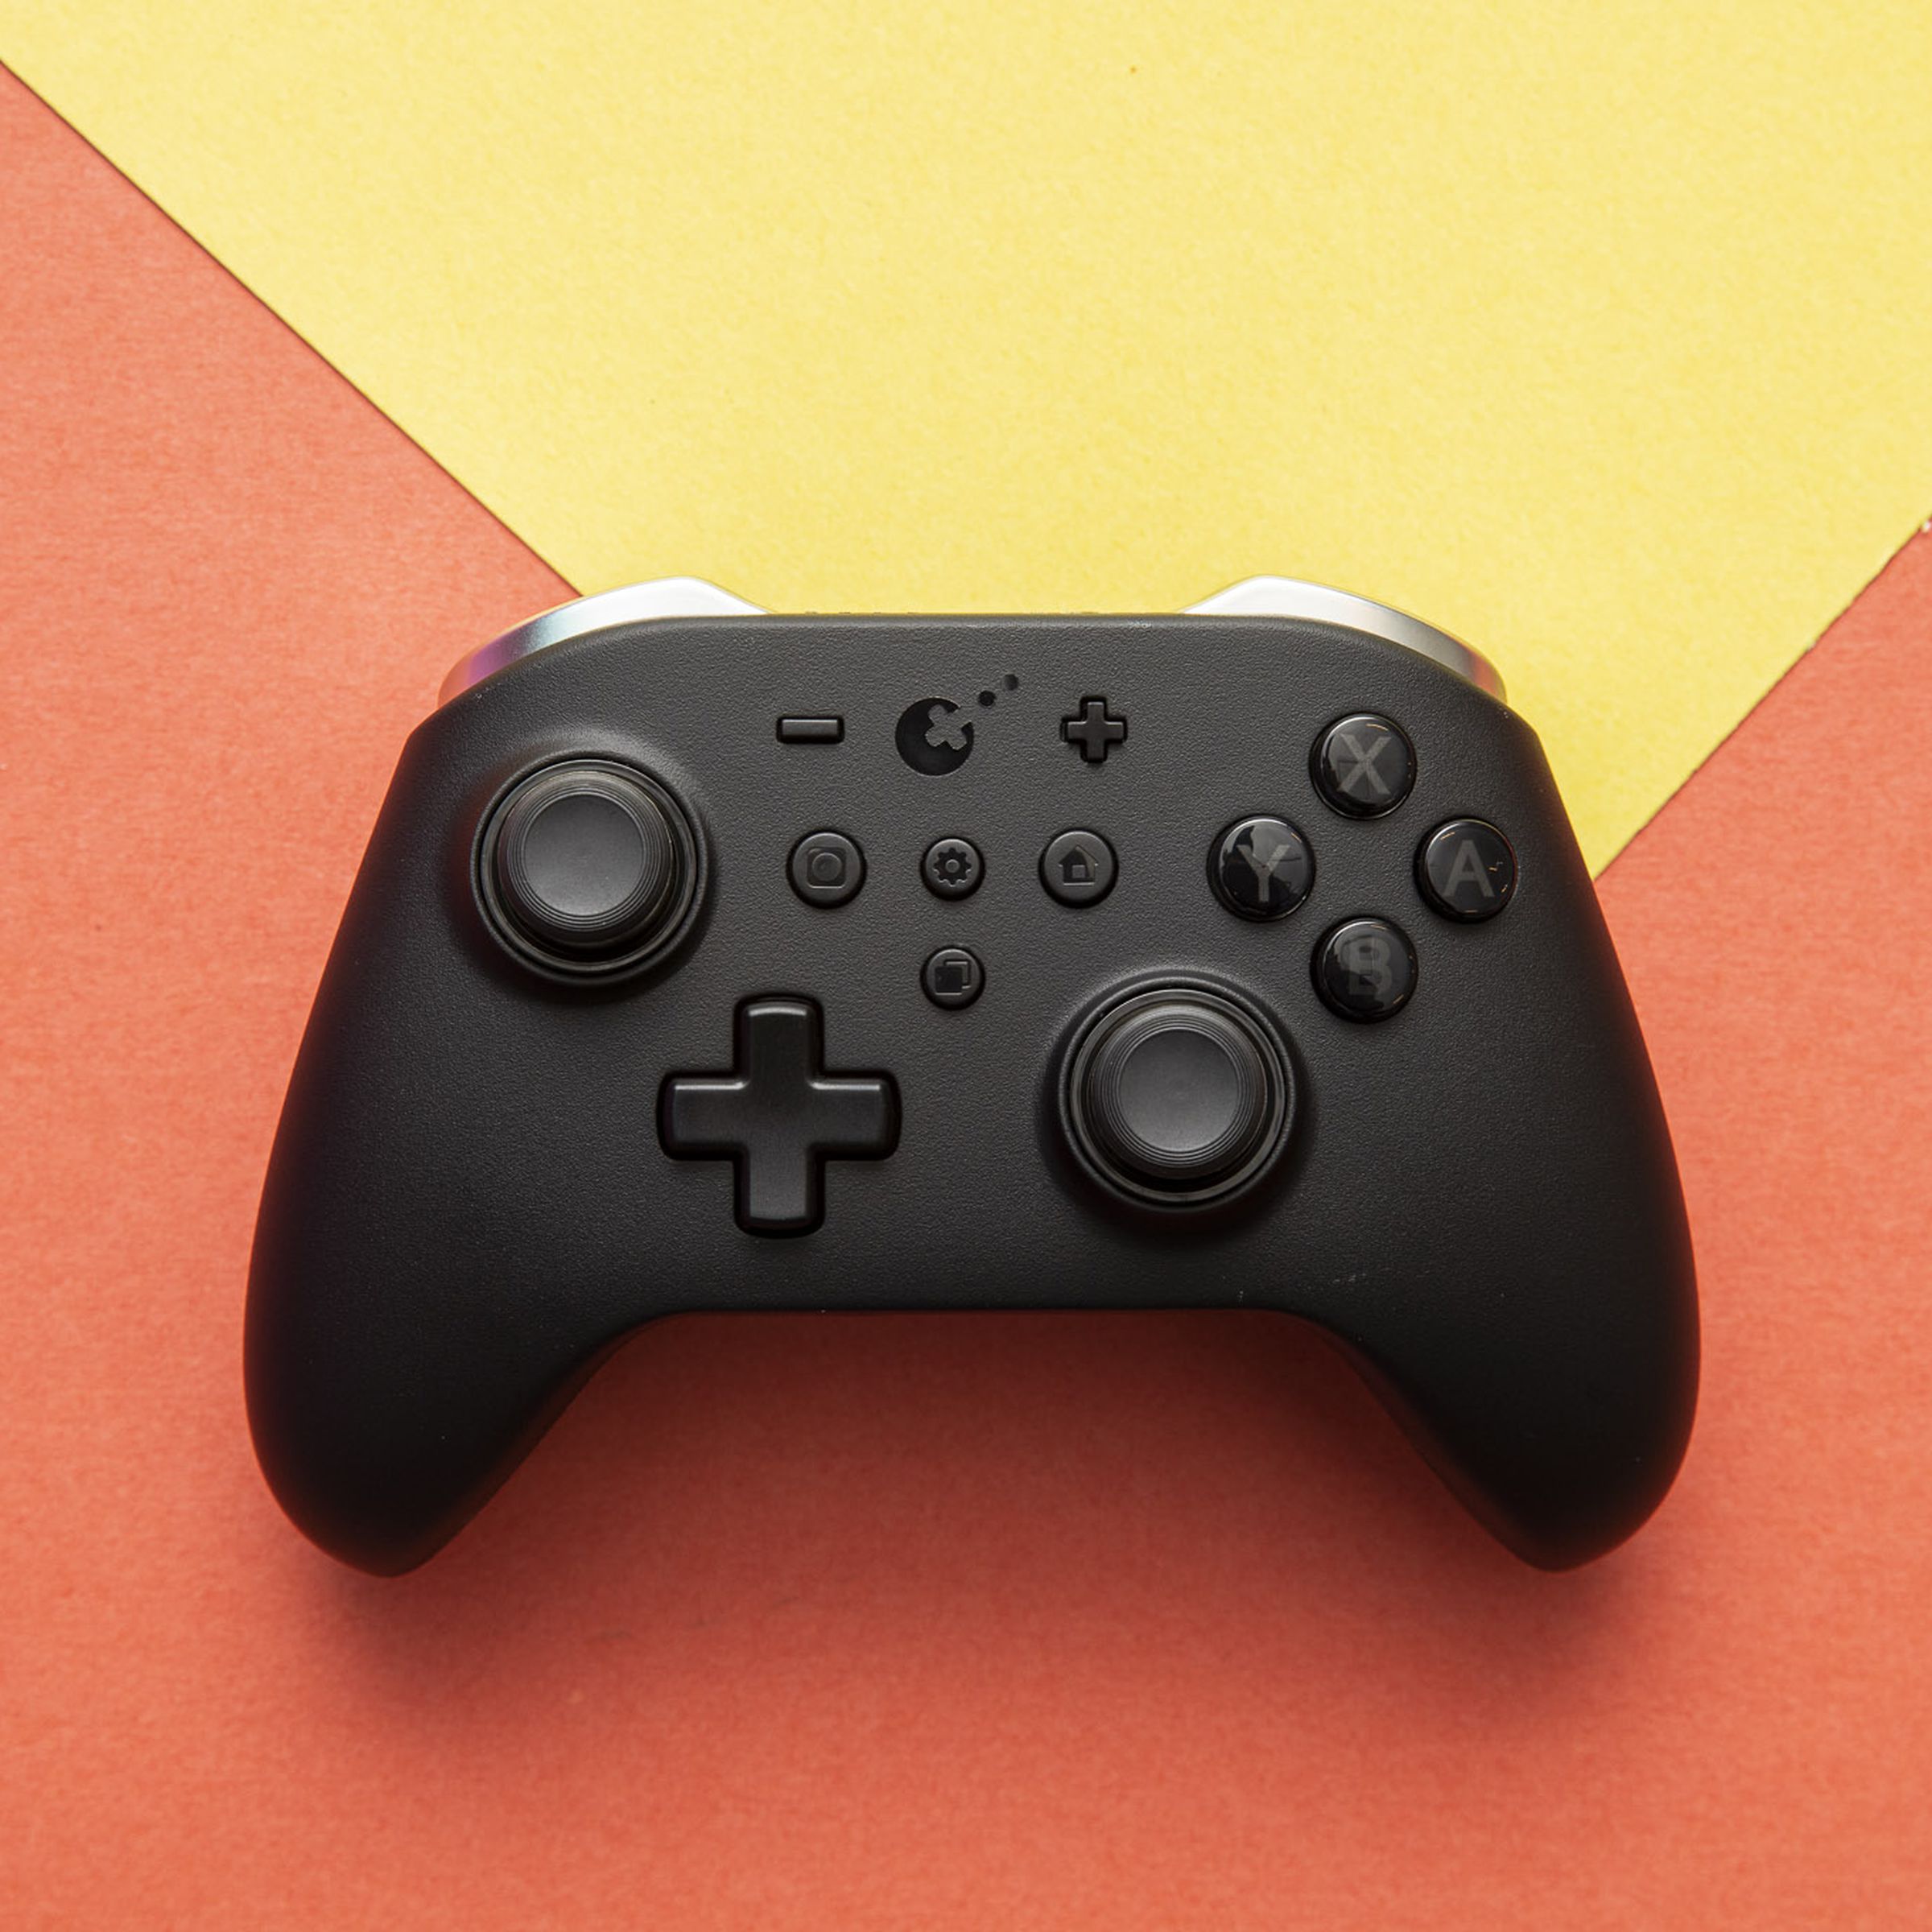 Top-down shot of the GuliKit KingKong 2 Pro controller, which looks like an Xbox controller.